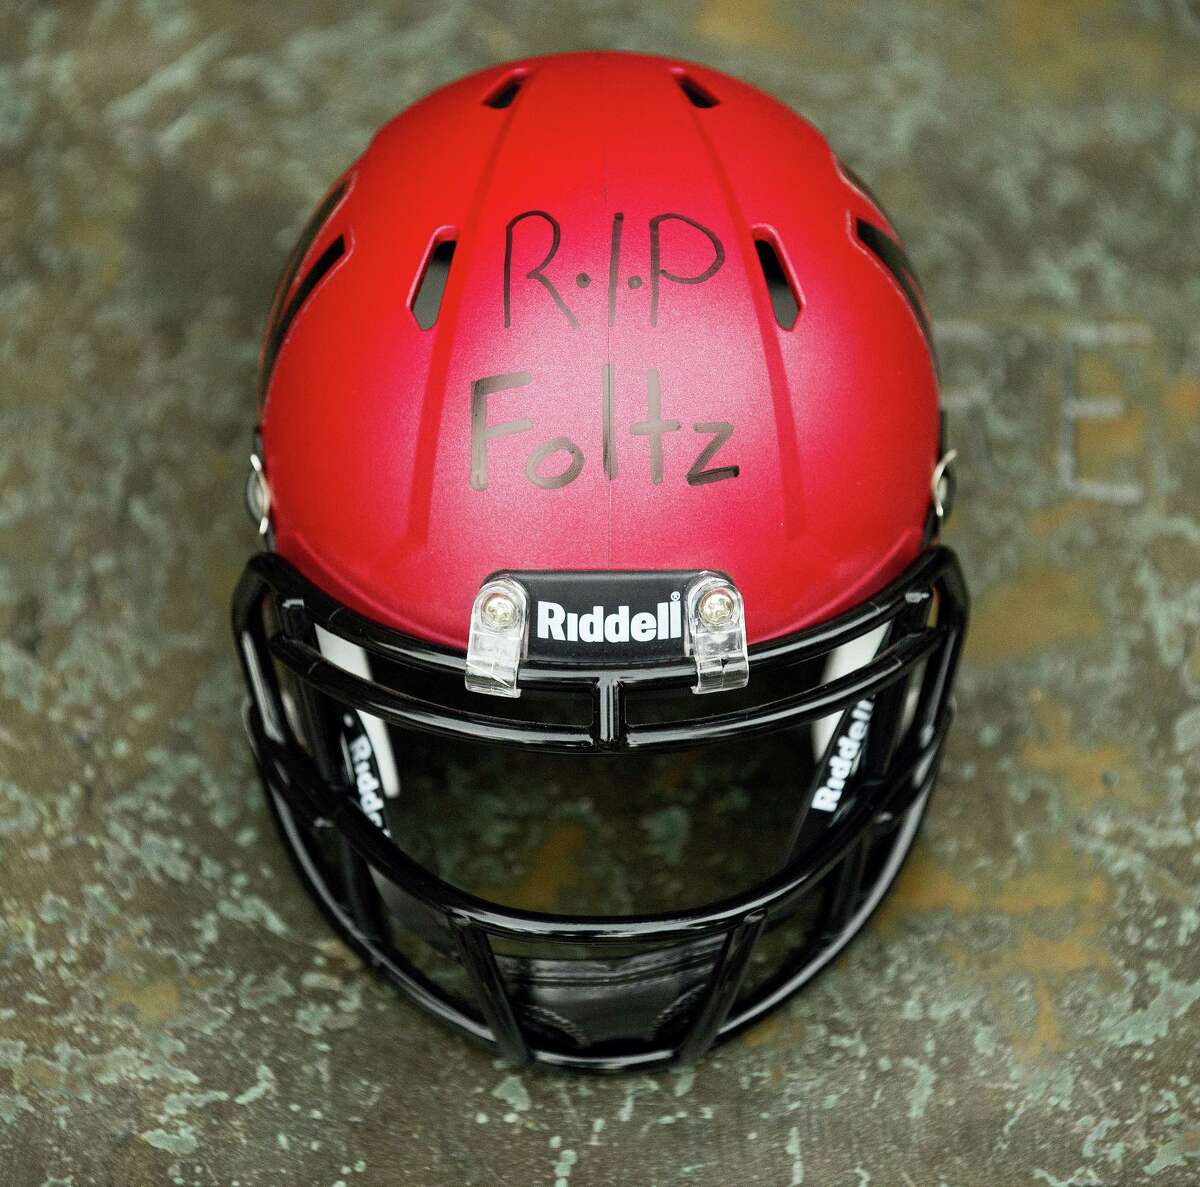 A Nebraska mini-football helmet inscribed “RIP Foltz,” for Nebraska punter Sam Foltz is seen during a vigil for Foltz, Sunday in Lincoln, Neb. Foltz and former Michigan State punter Mike Sadler died in a car crash in Wisconsin after working at a kicking clinic.